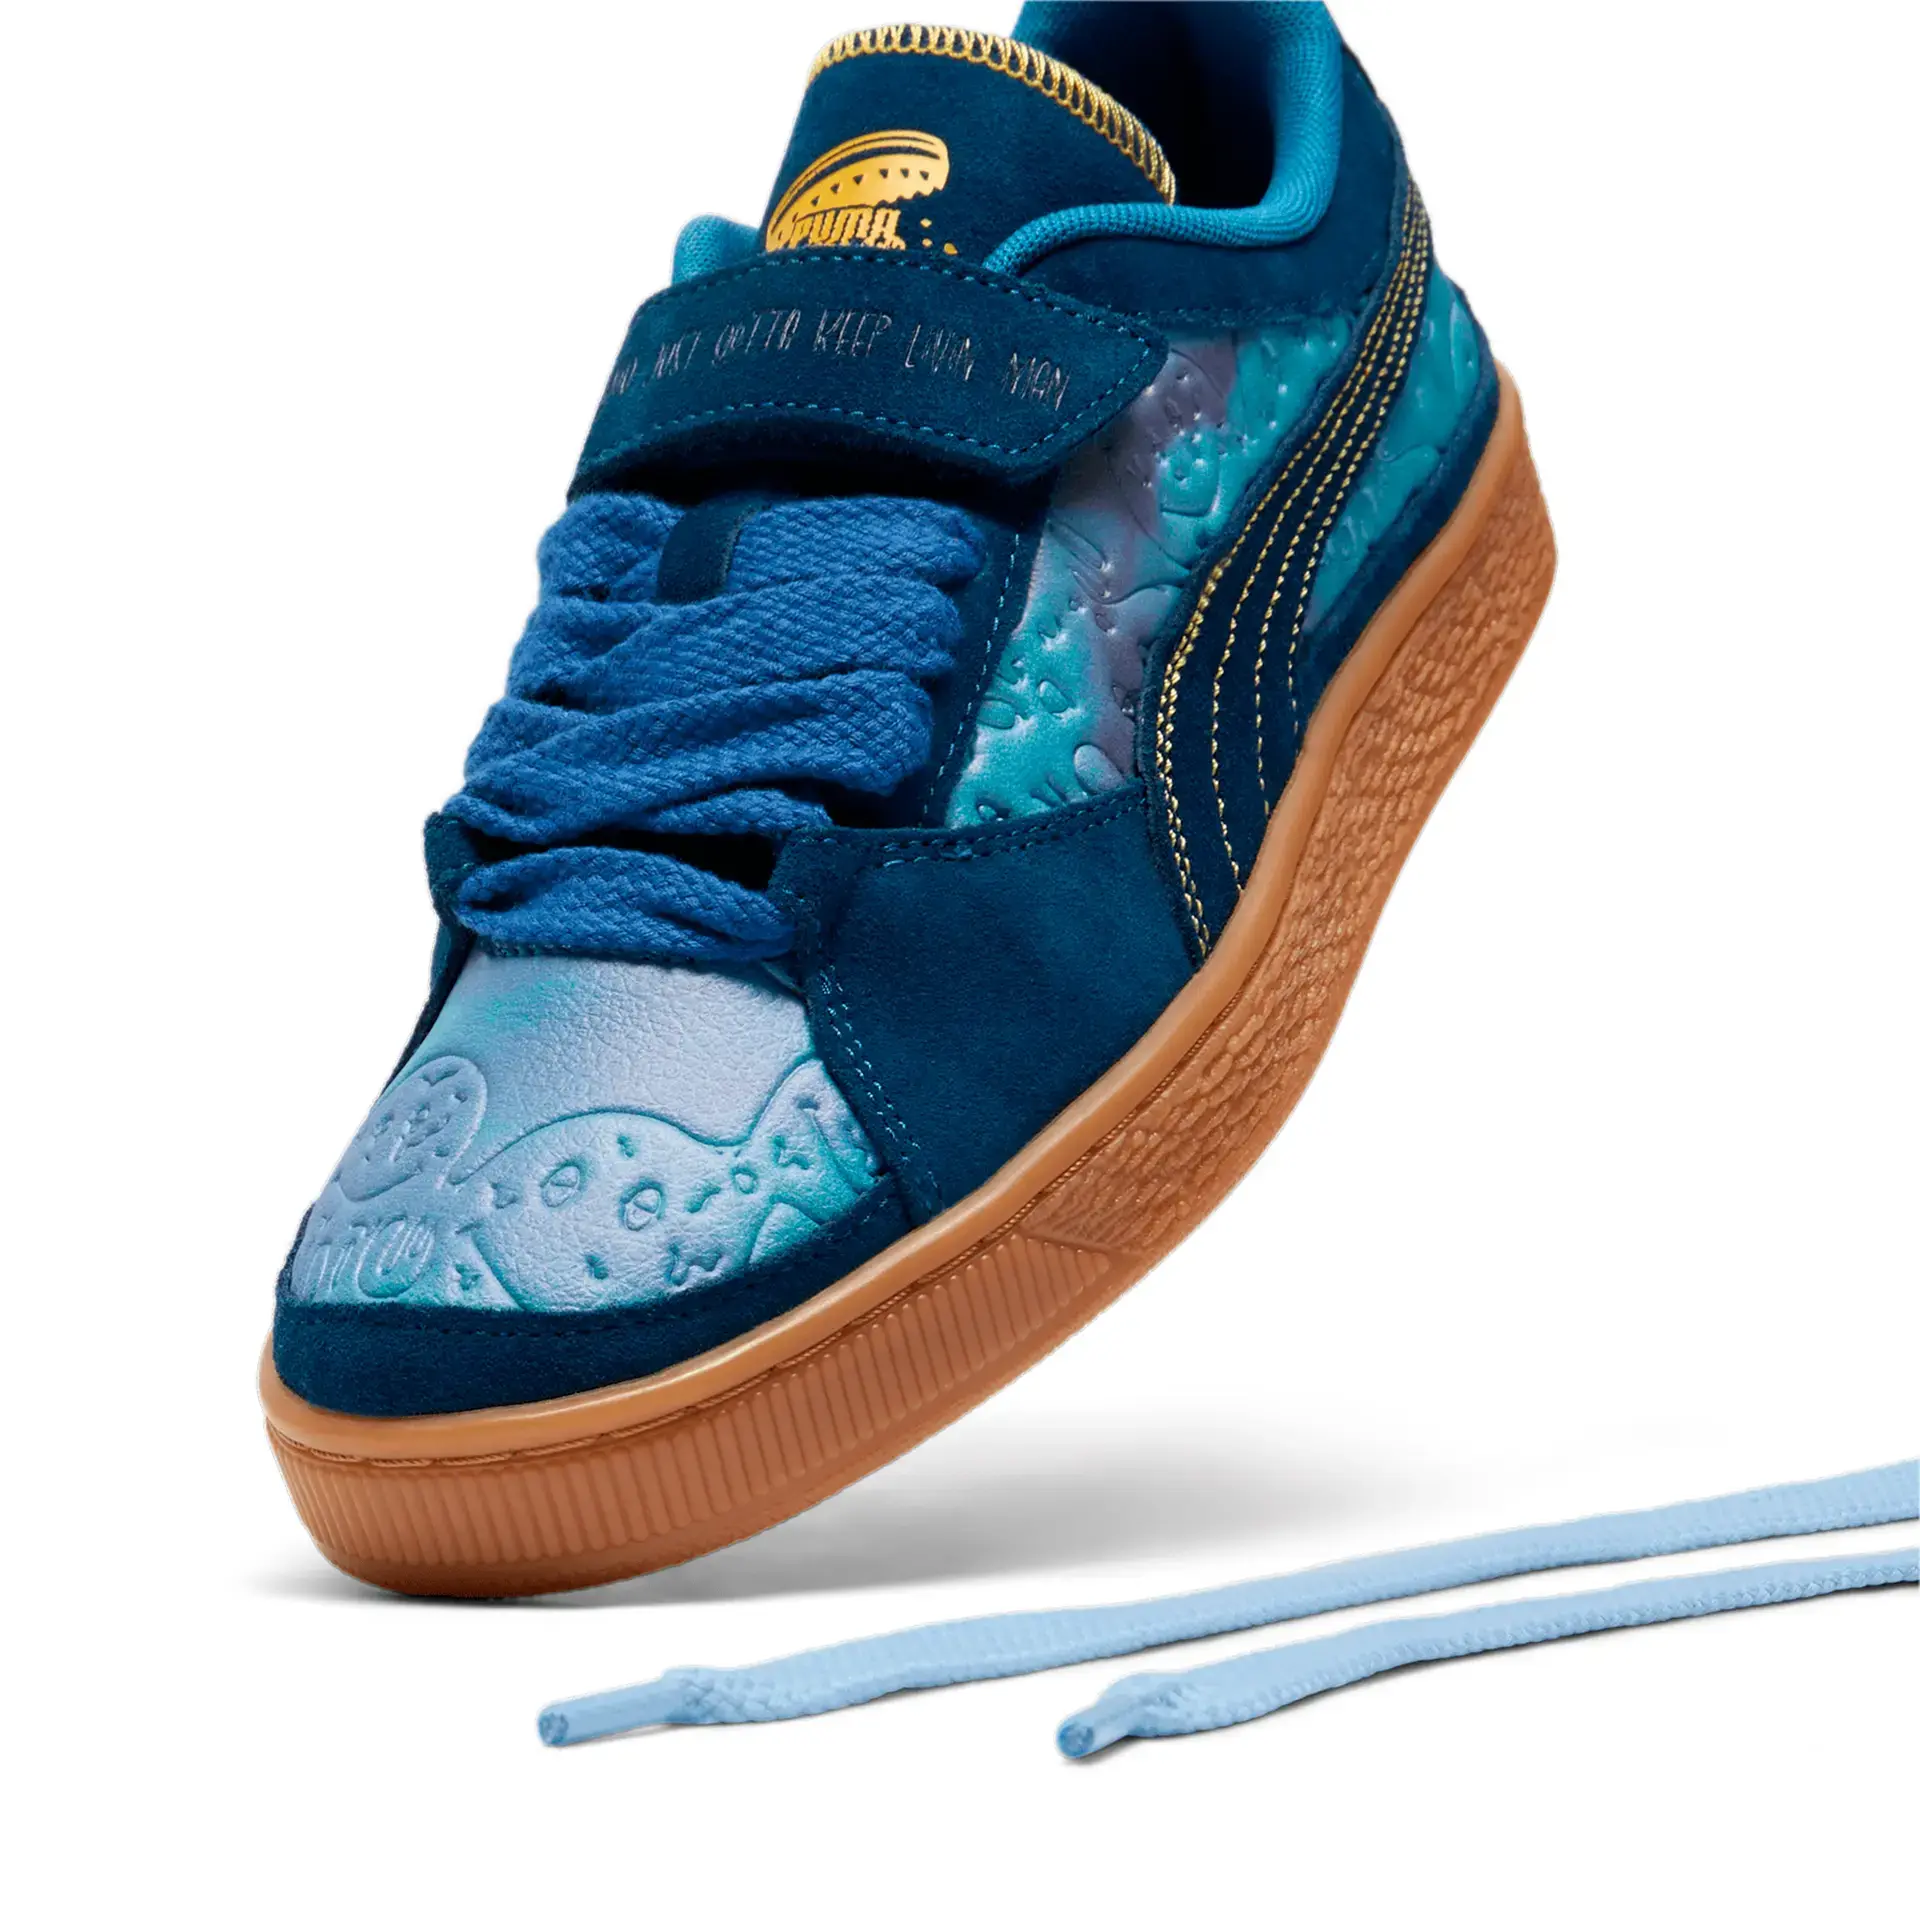 Dazed and Confused x PUMA Suede 'Persian Blue'